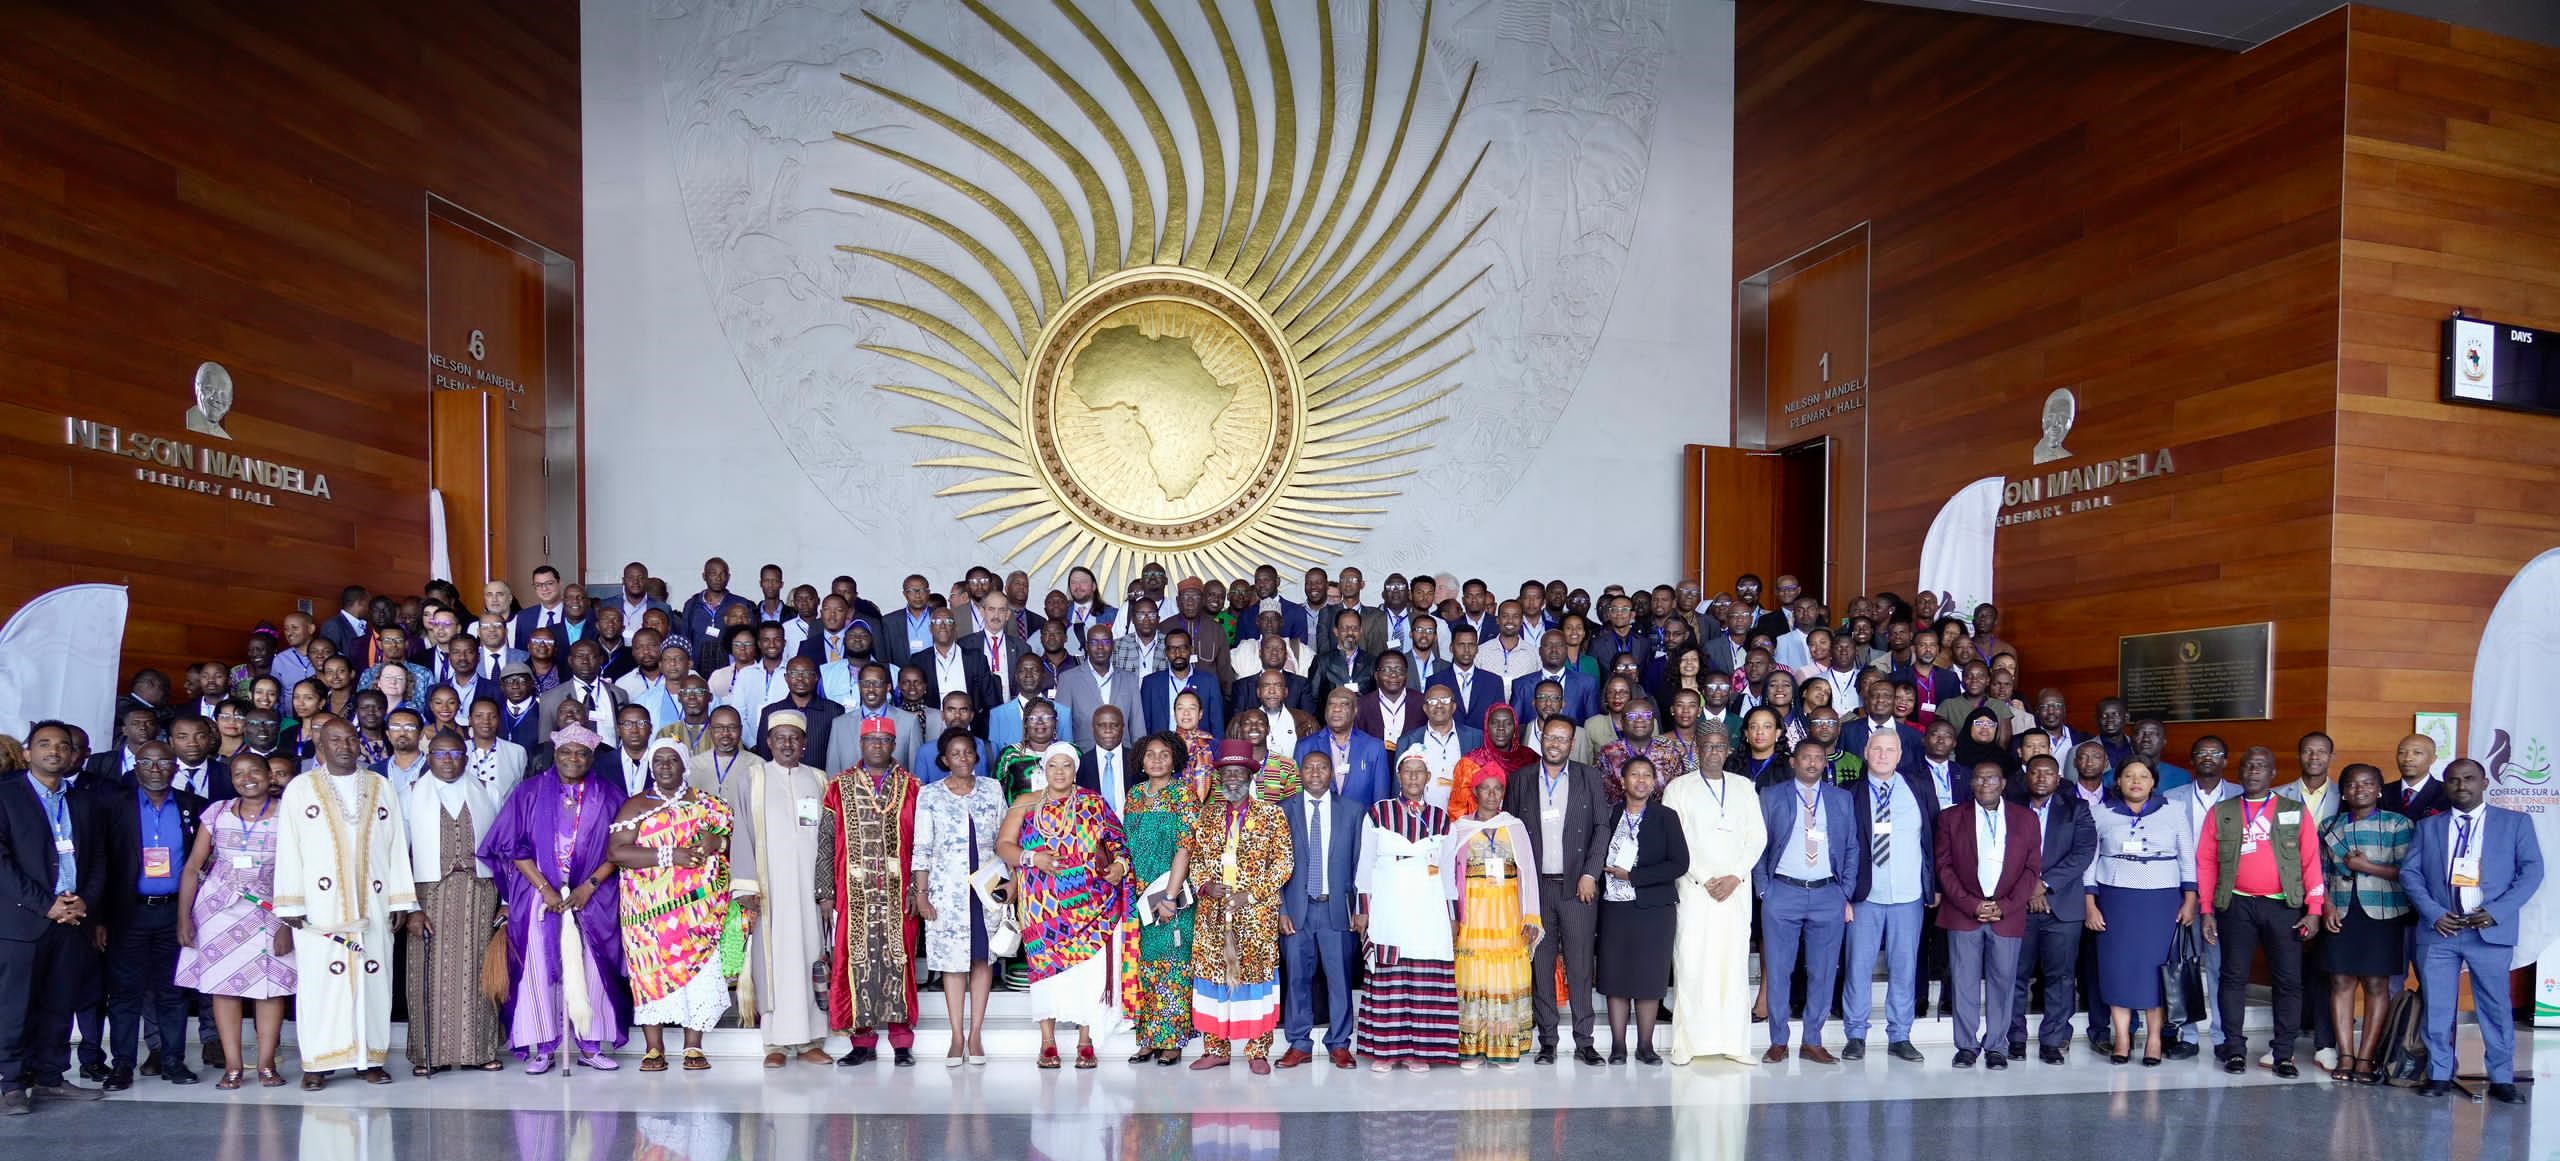 AU believes African countries have made progress in advancing land policies on the continent